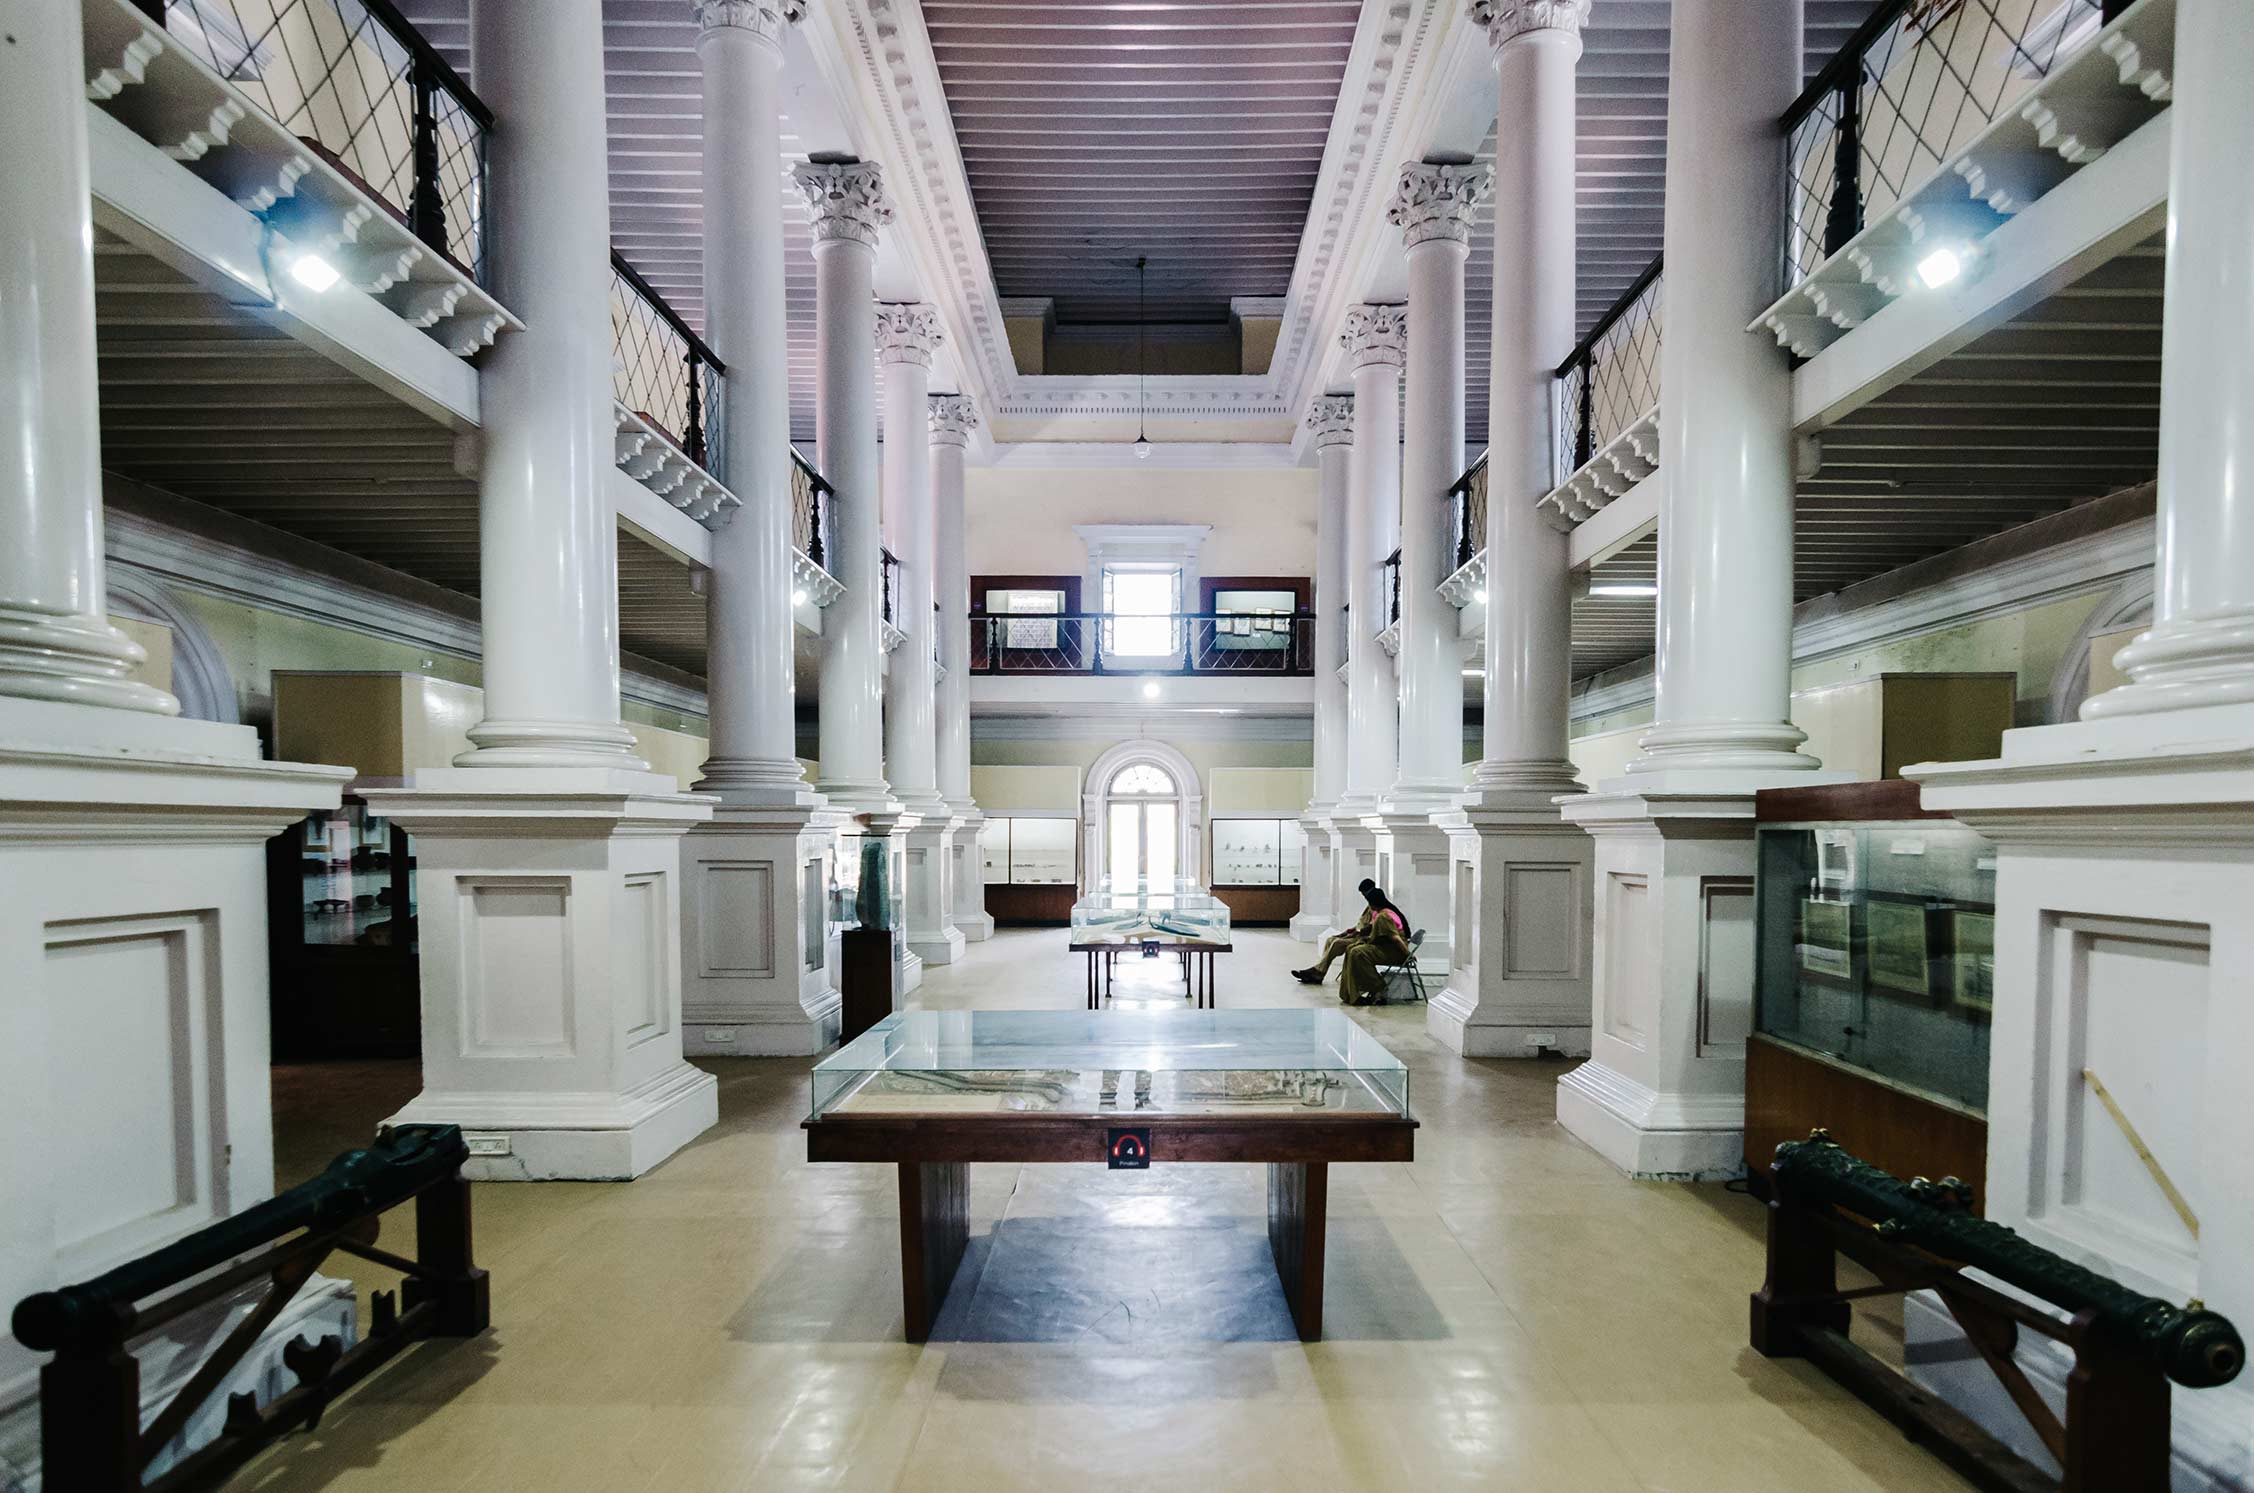 Ground floor of the Government Museum 